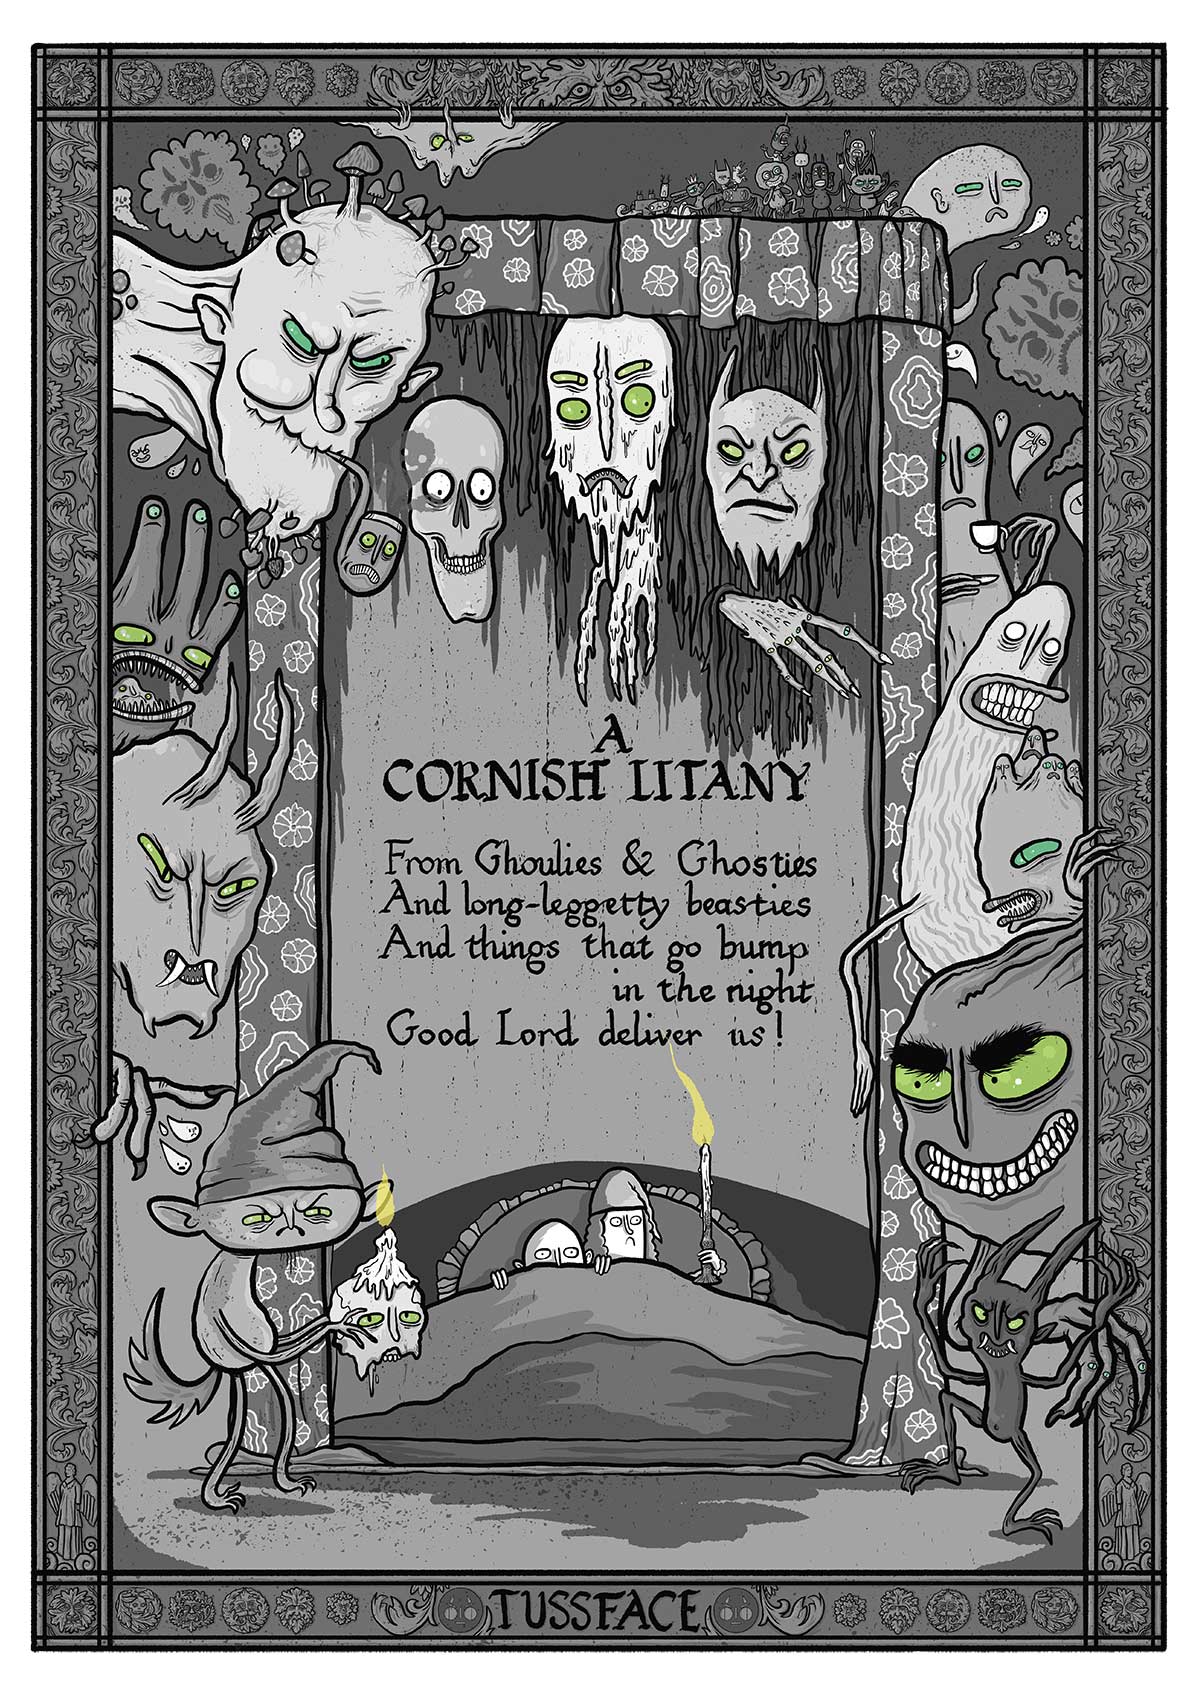 A Cornish Litany - A3 Framed TussFace Print